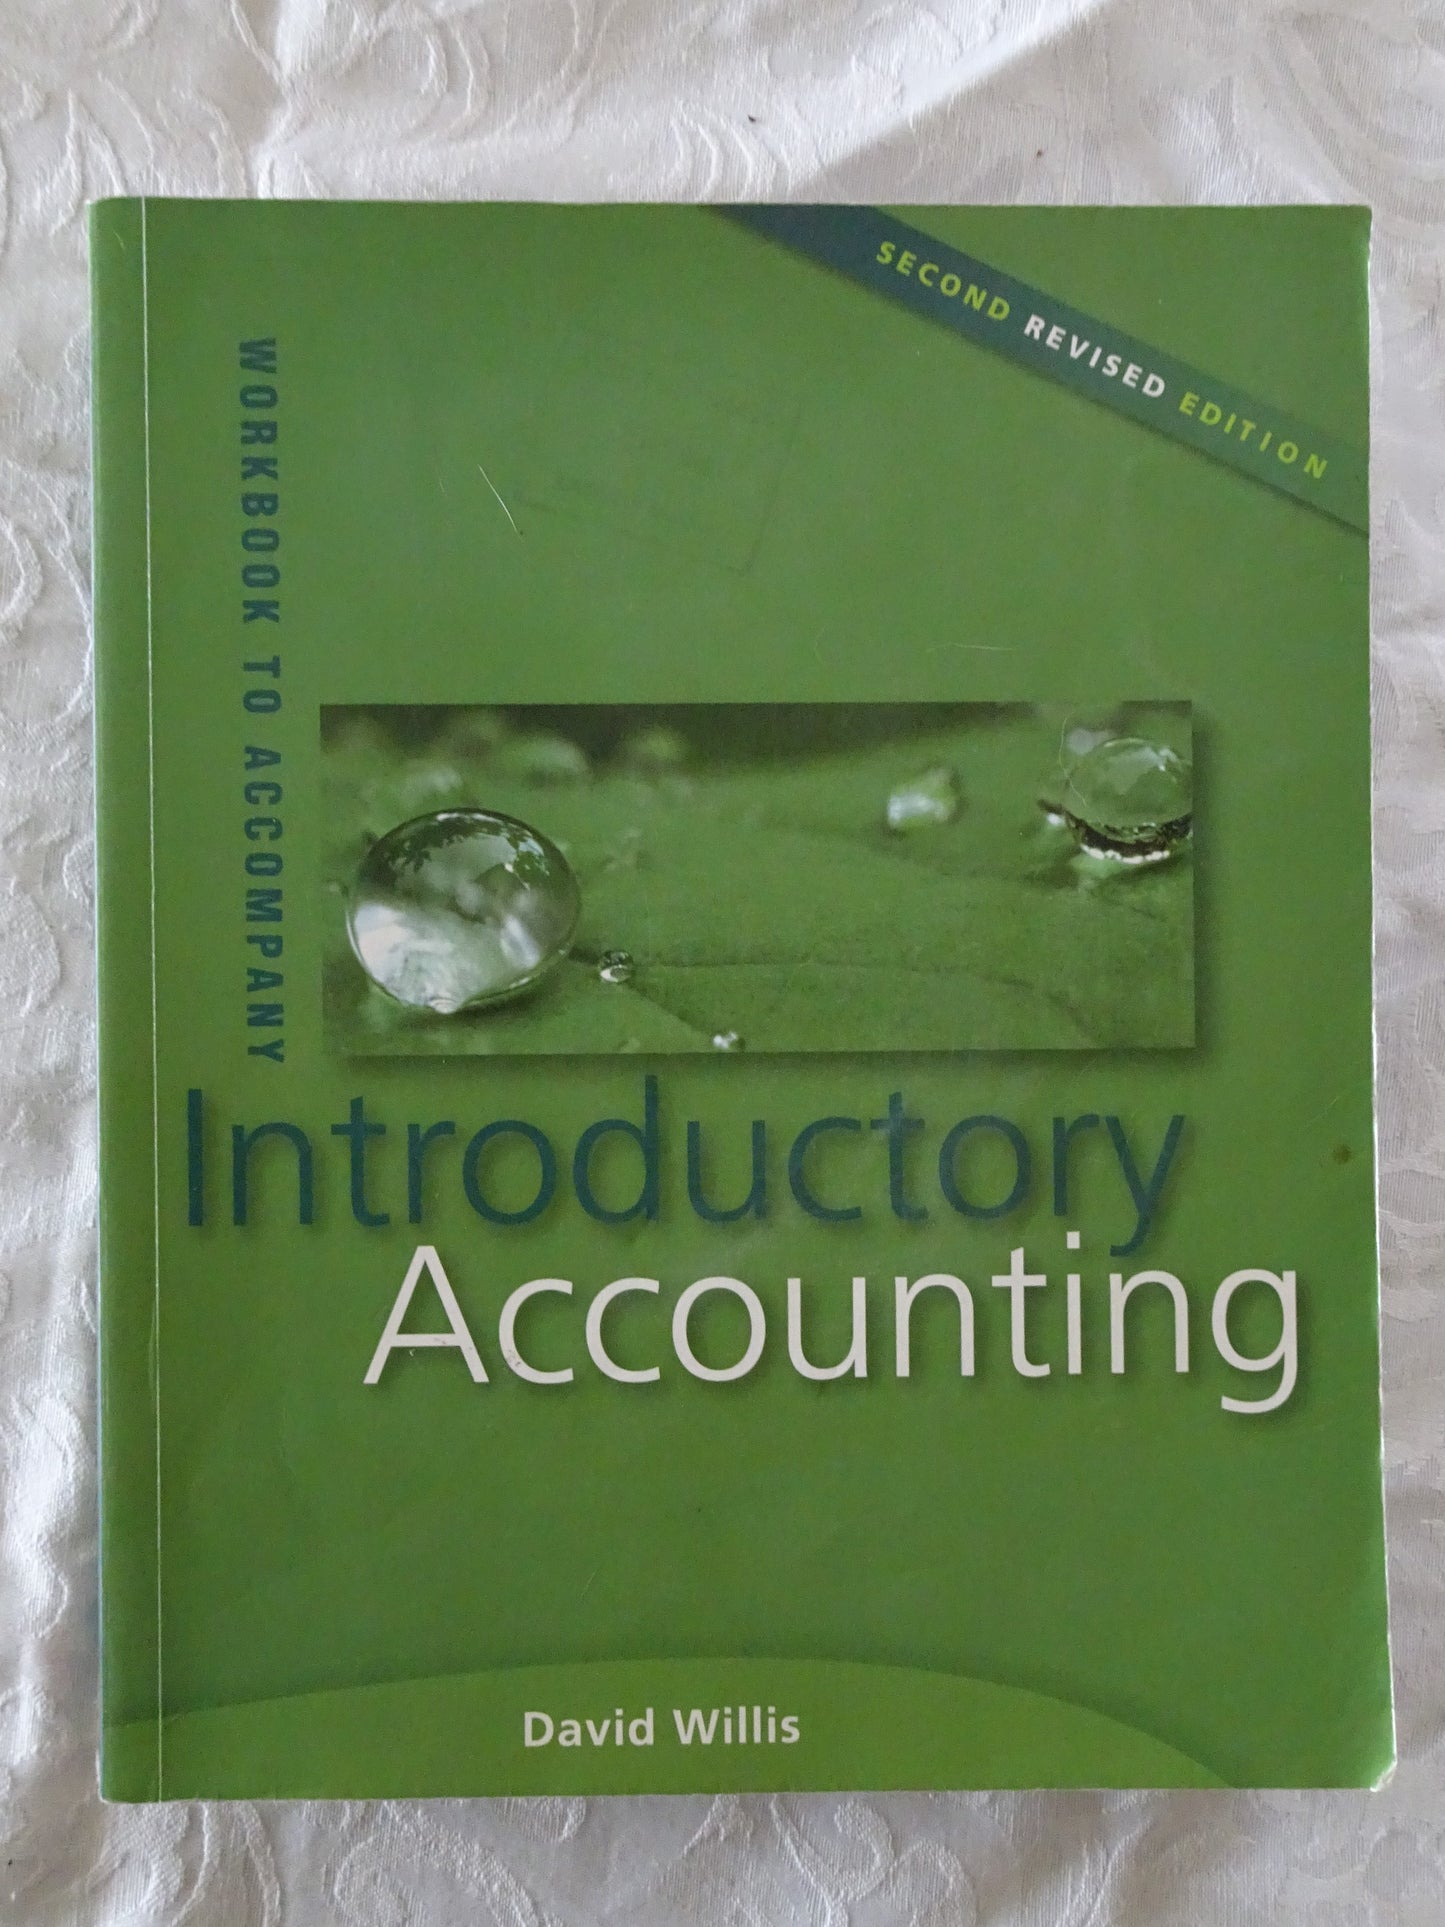 Introductory Accounting + Workbook to Accompany by David Willis